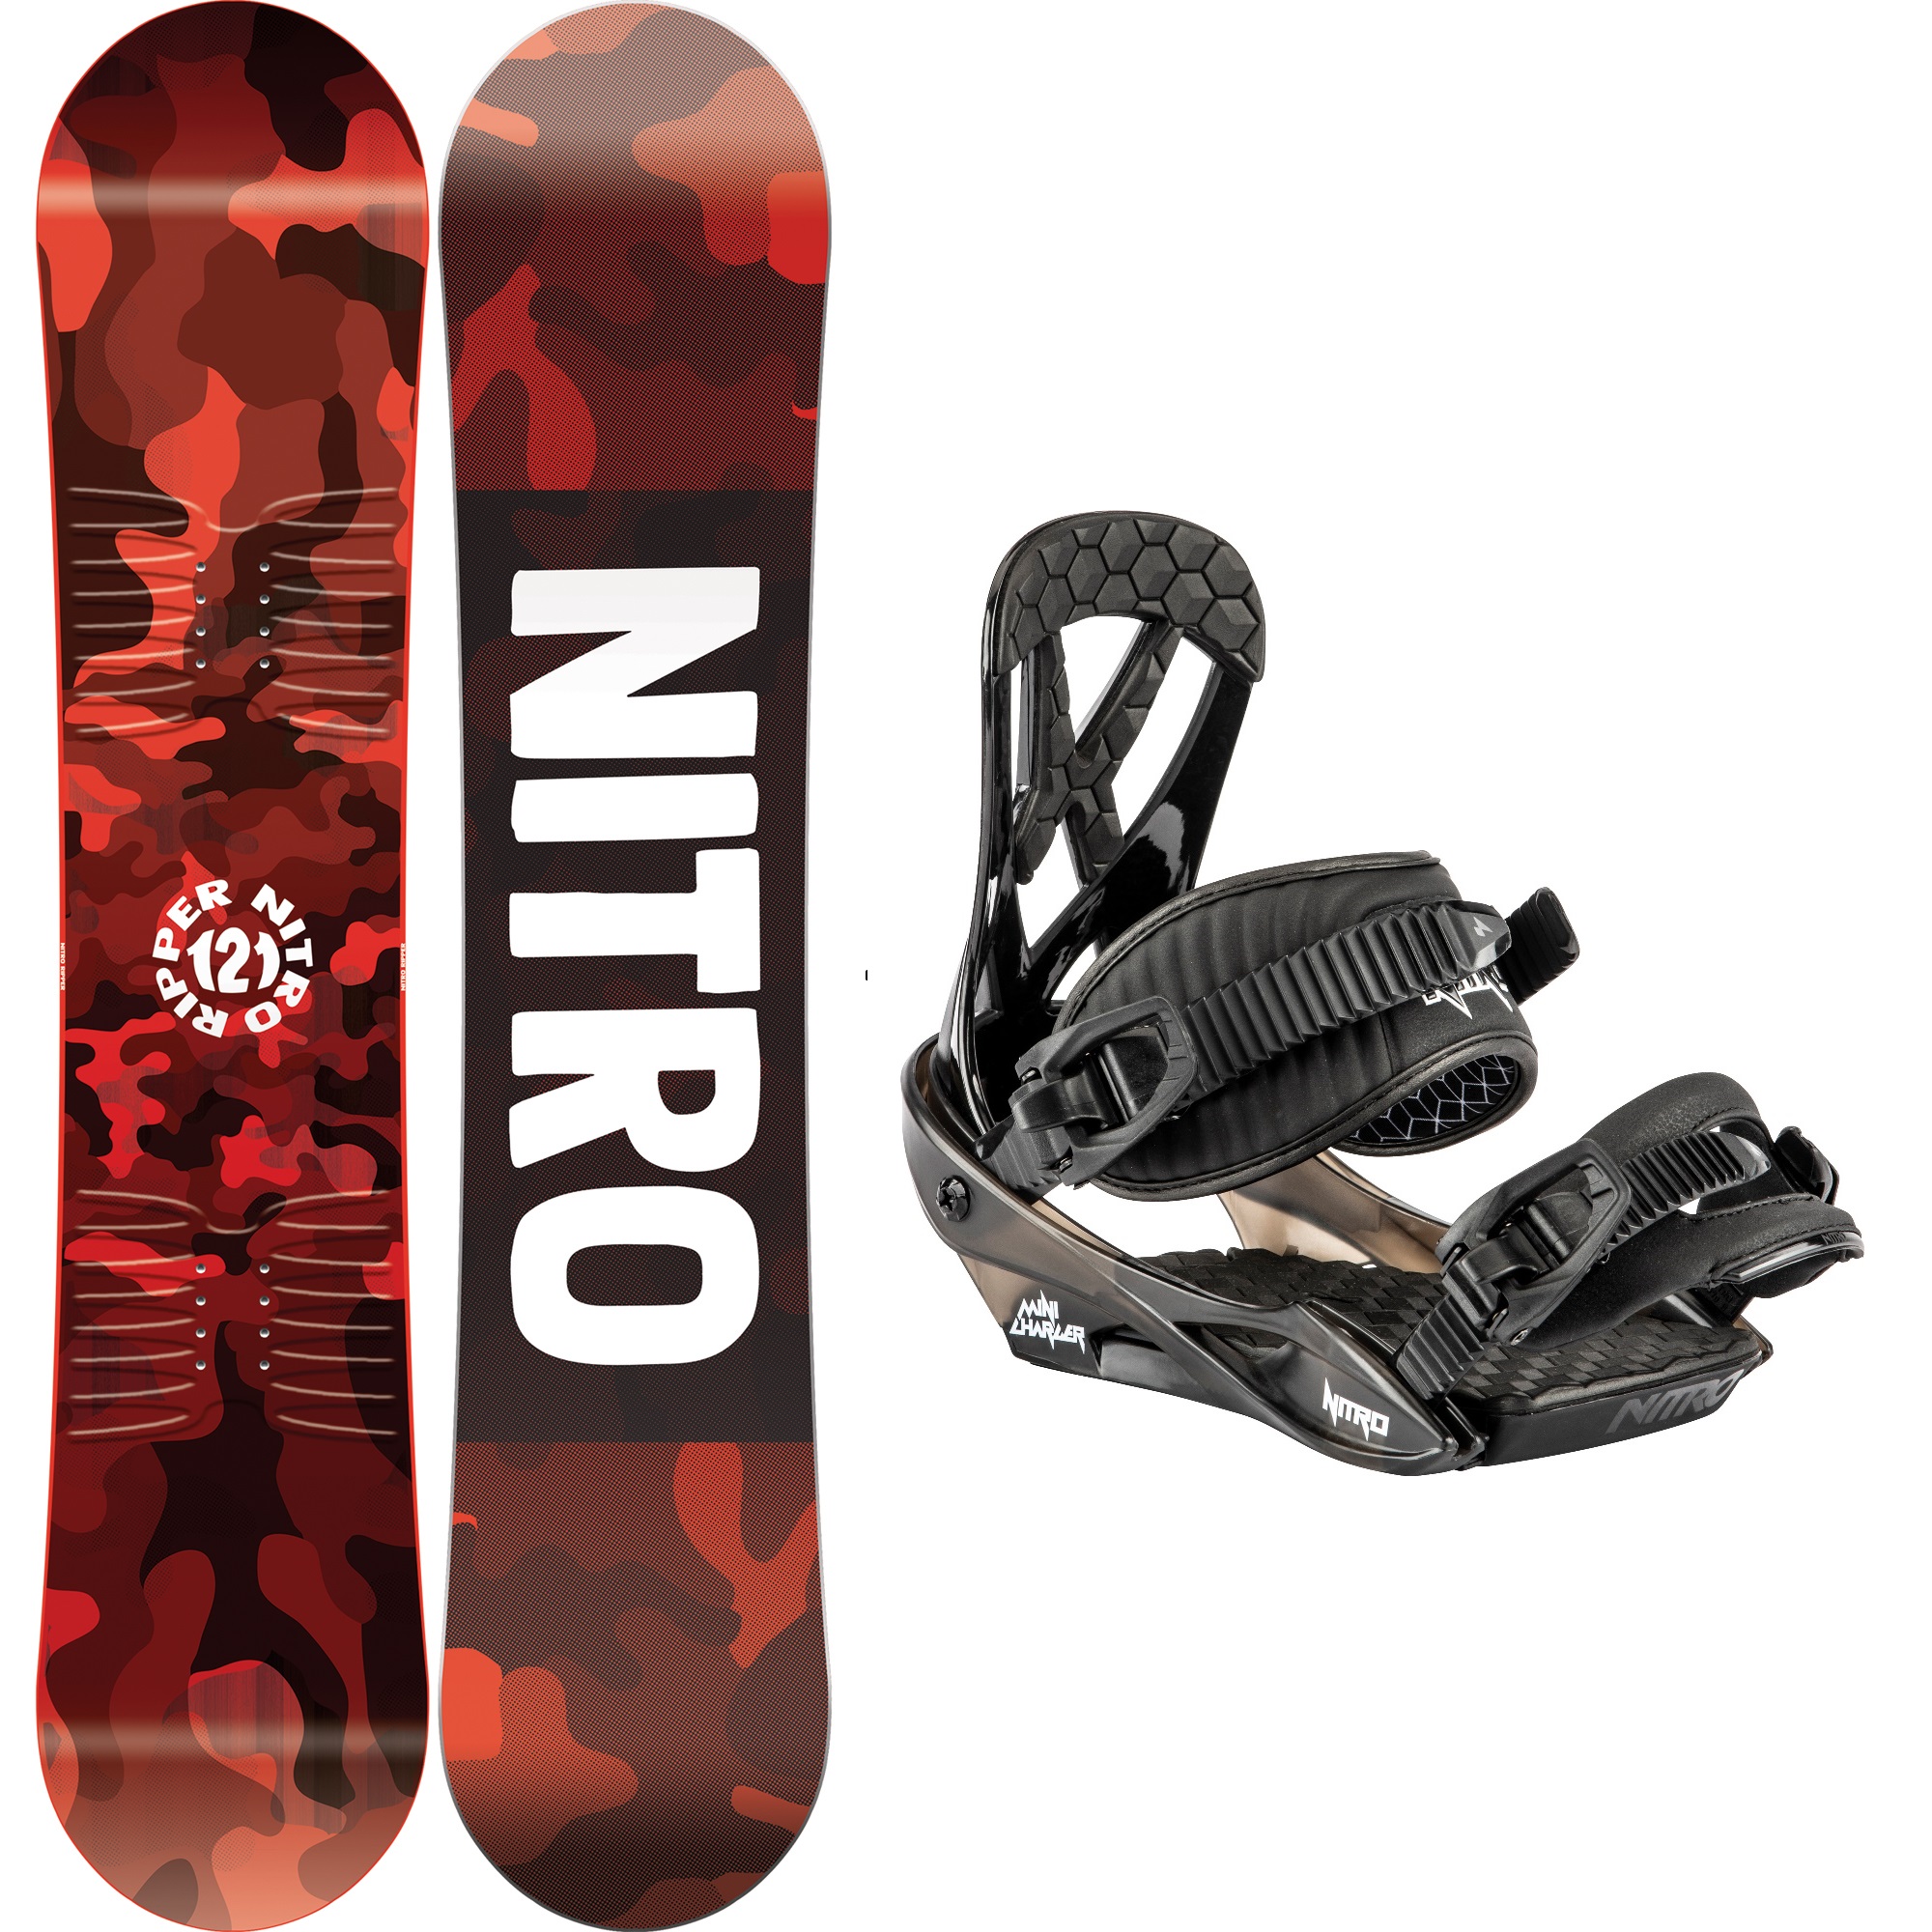 Snowboard Package -  nitro RIPPER KIDS + CHARGER MINI